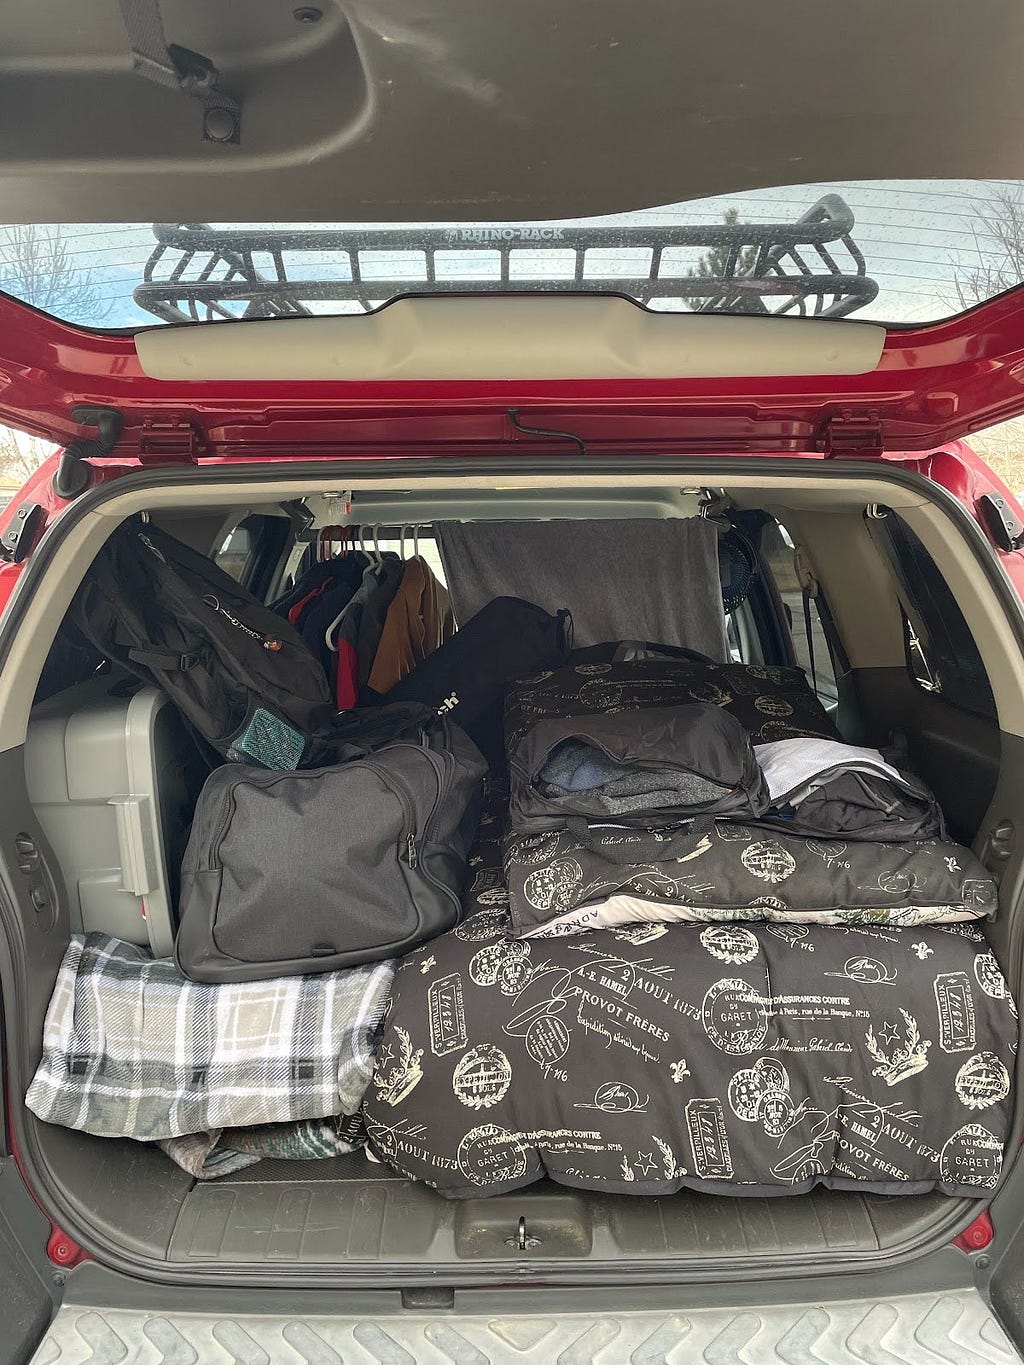 The SUV packed trunk.